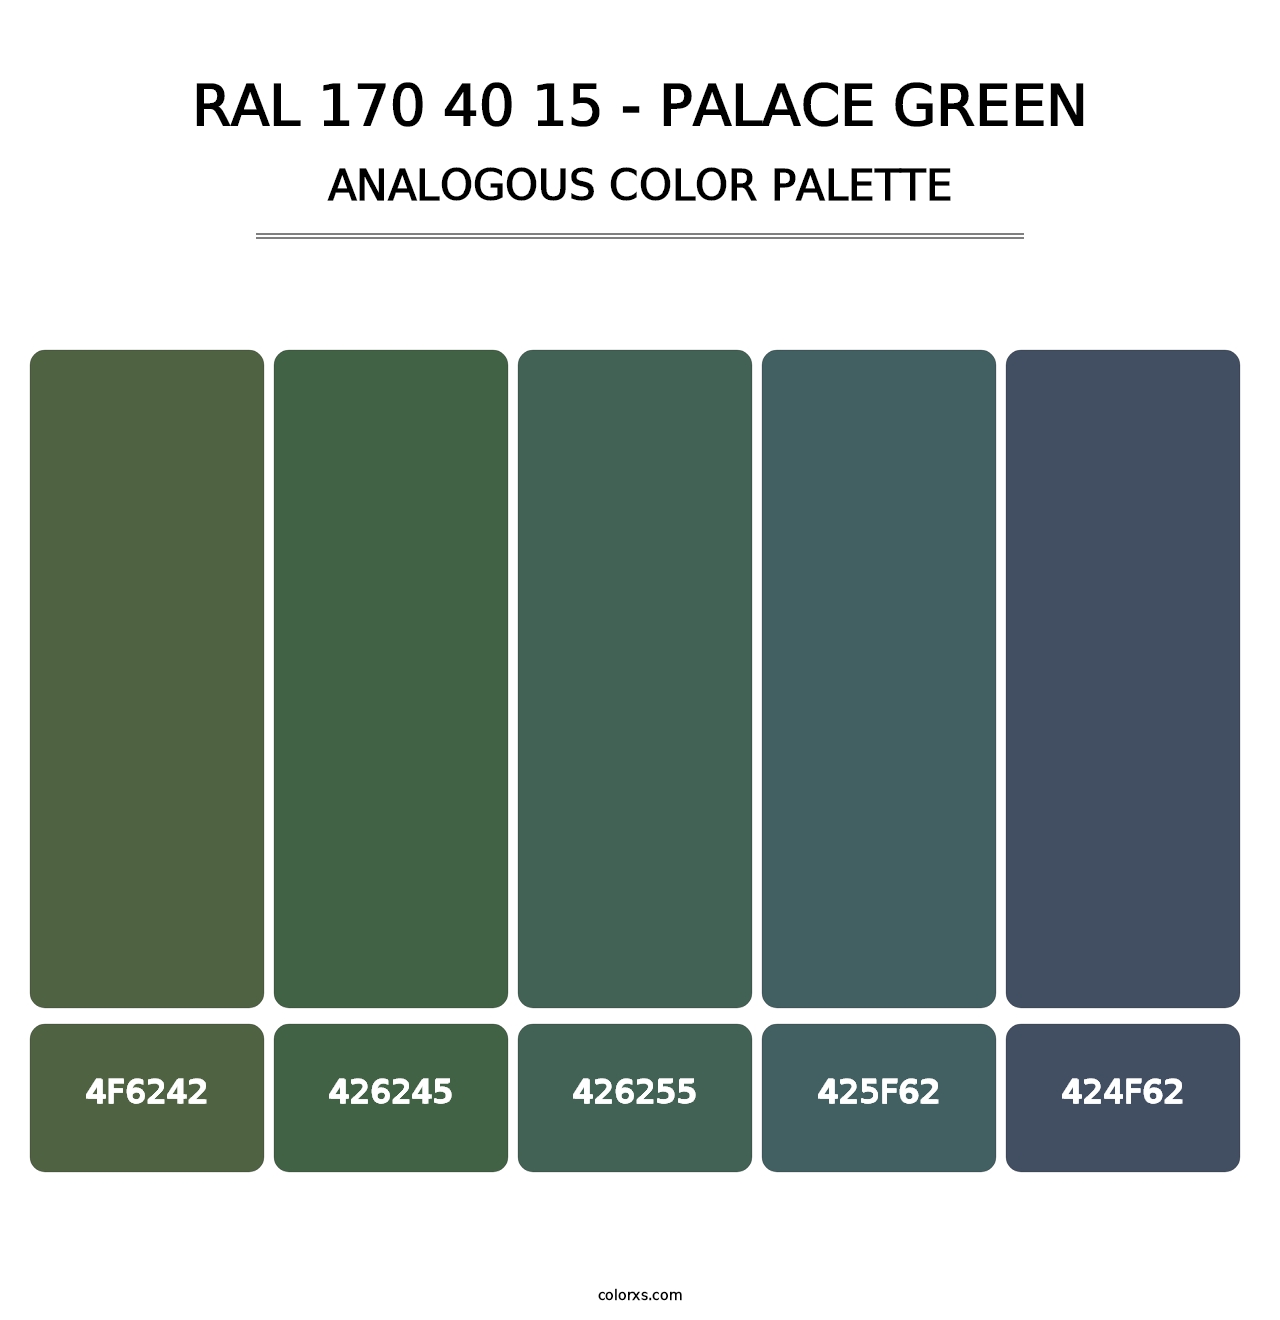 RAL 170 40 15 - Palace Green - Analogous Color Palette